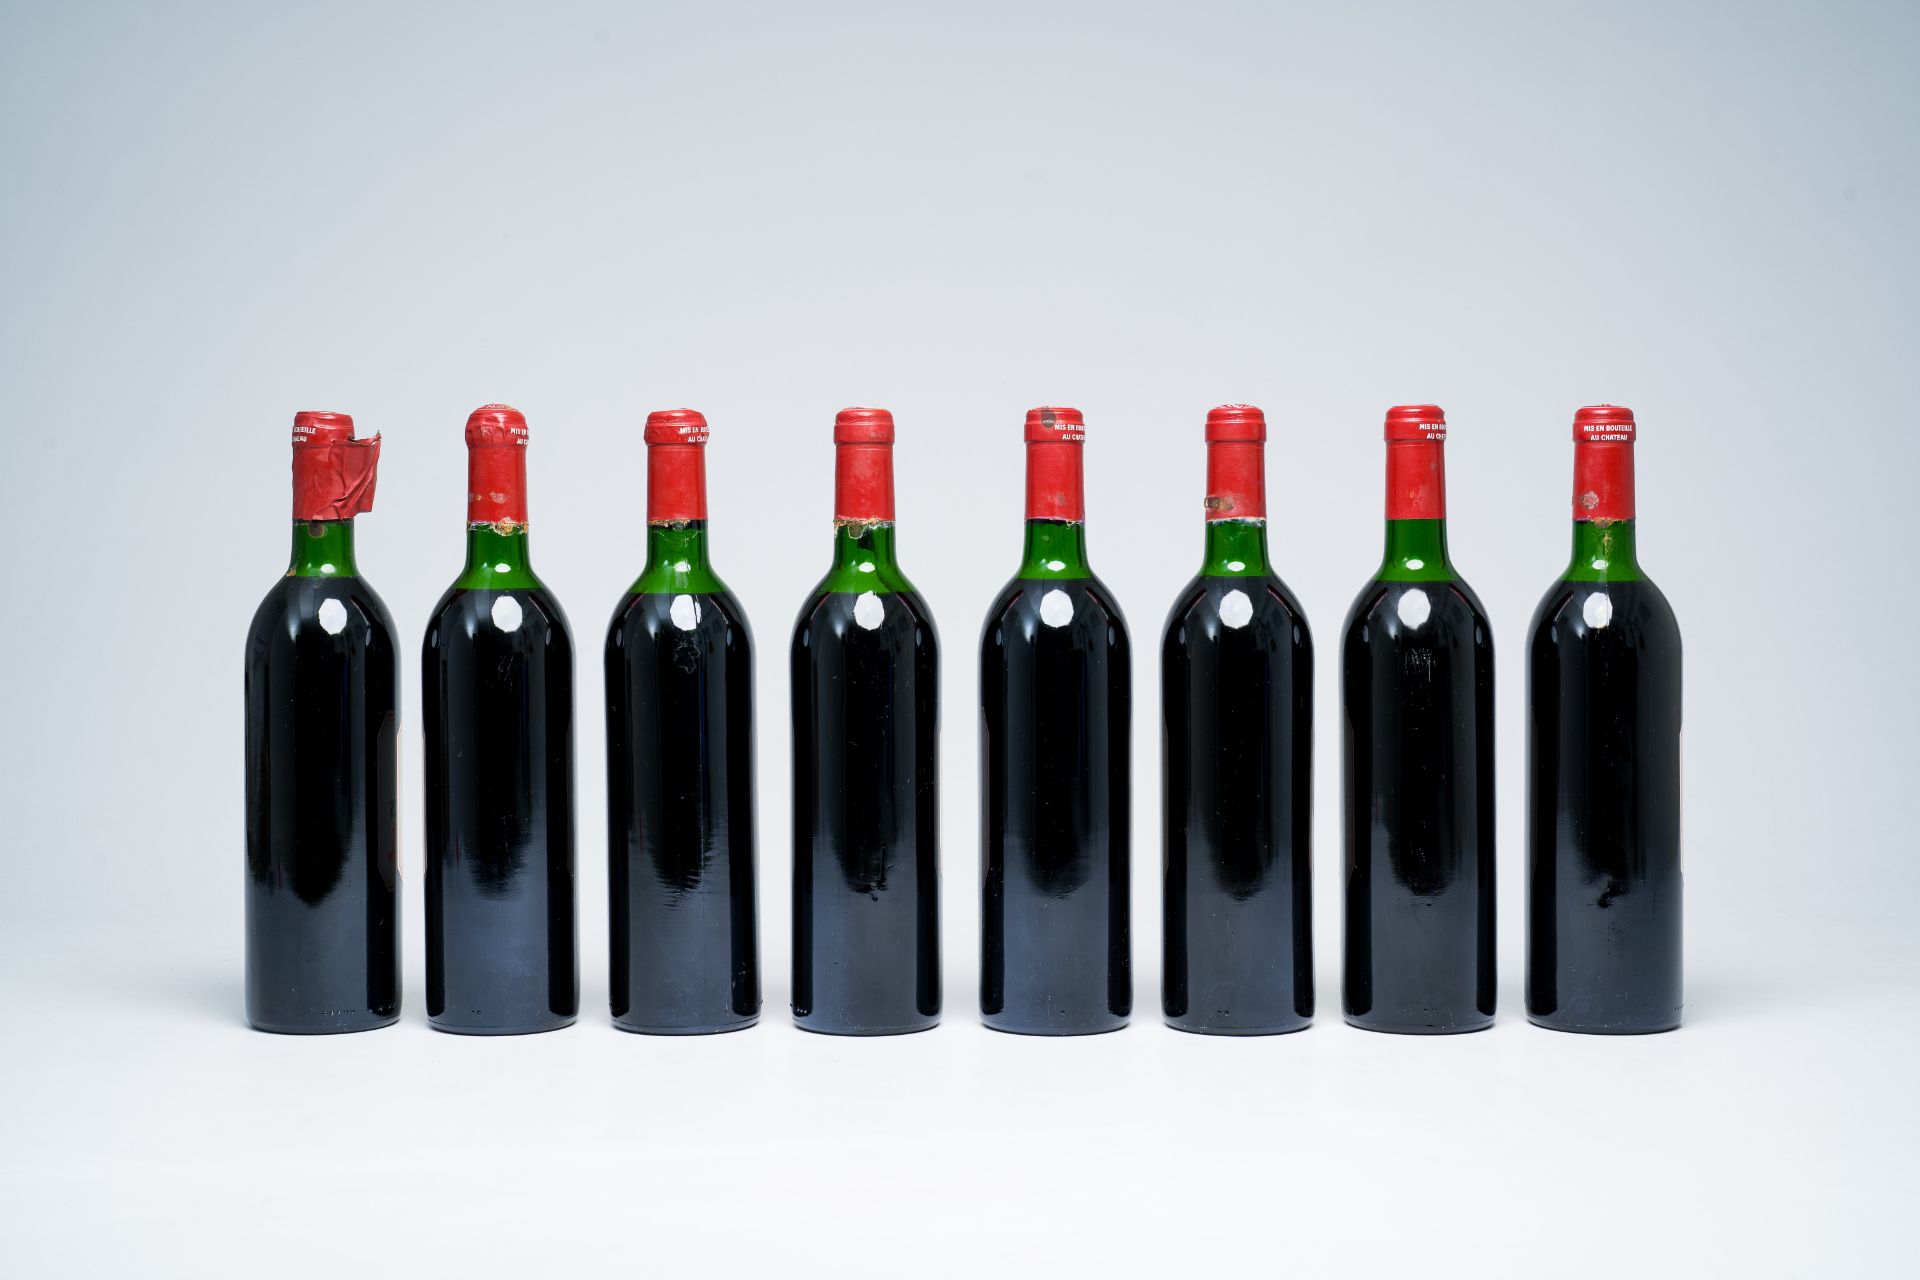 Eight bottles of Chateau Lynch Bages, Pauillac, 1985